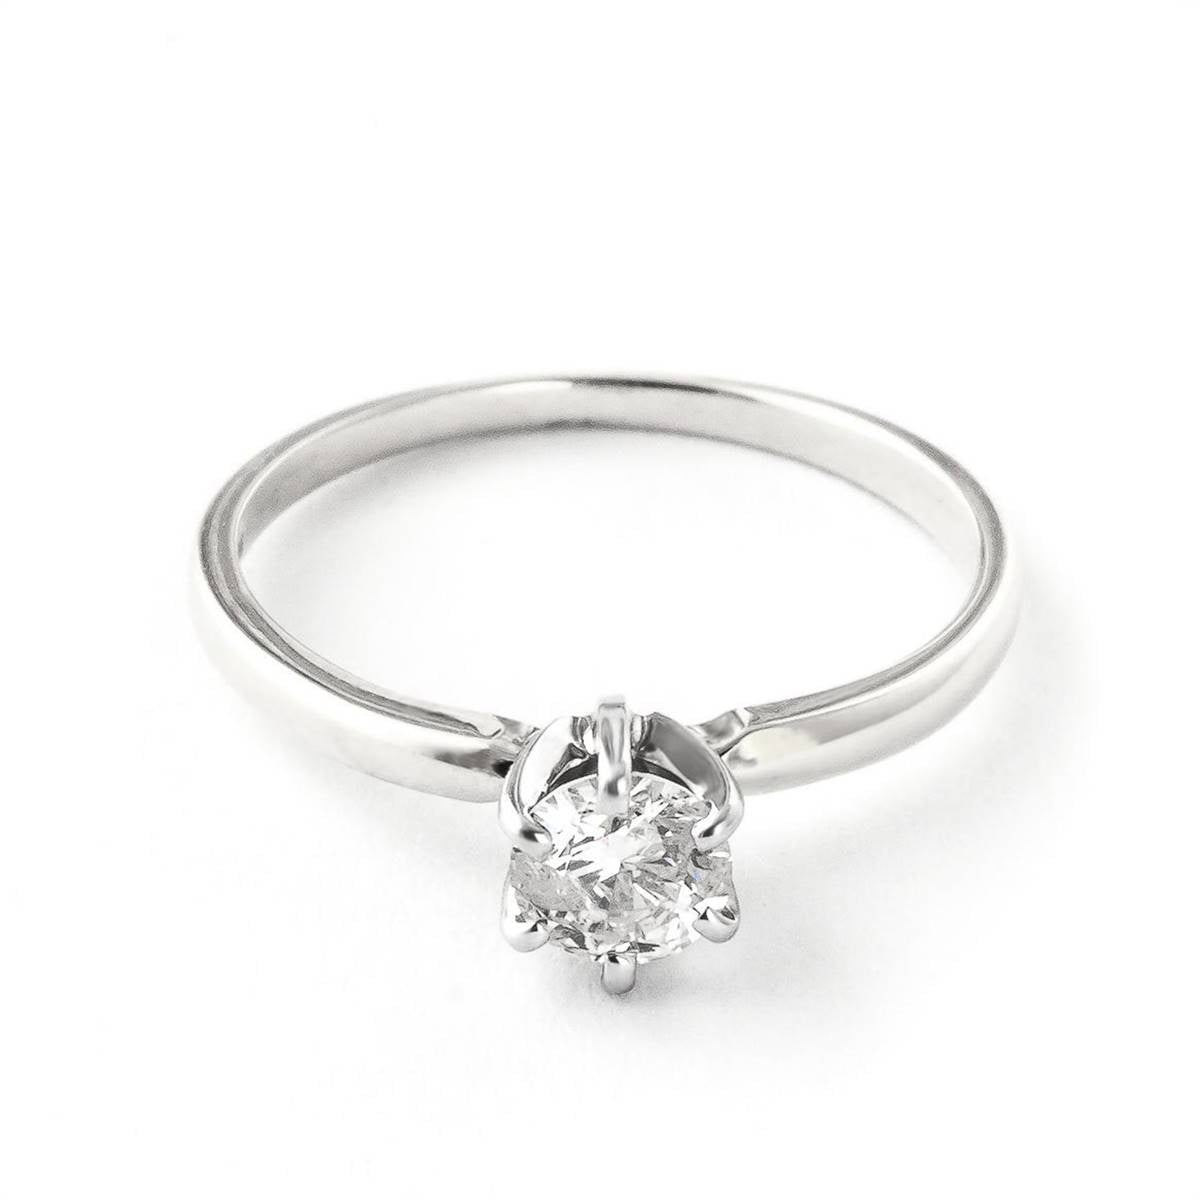 14K Solid White Gold Solitaire Ring w/ 0.40 Carat H-i, Si-2 Natural Diamond